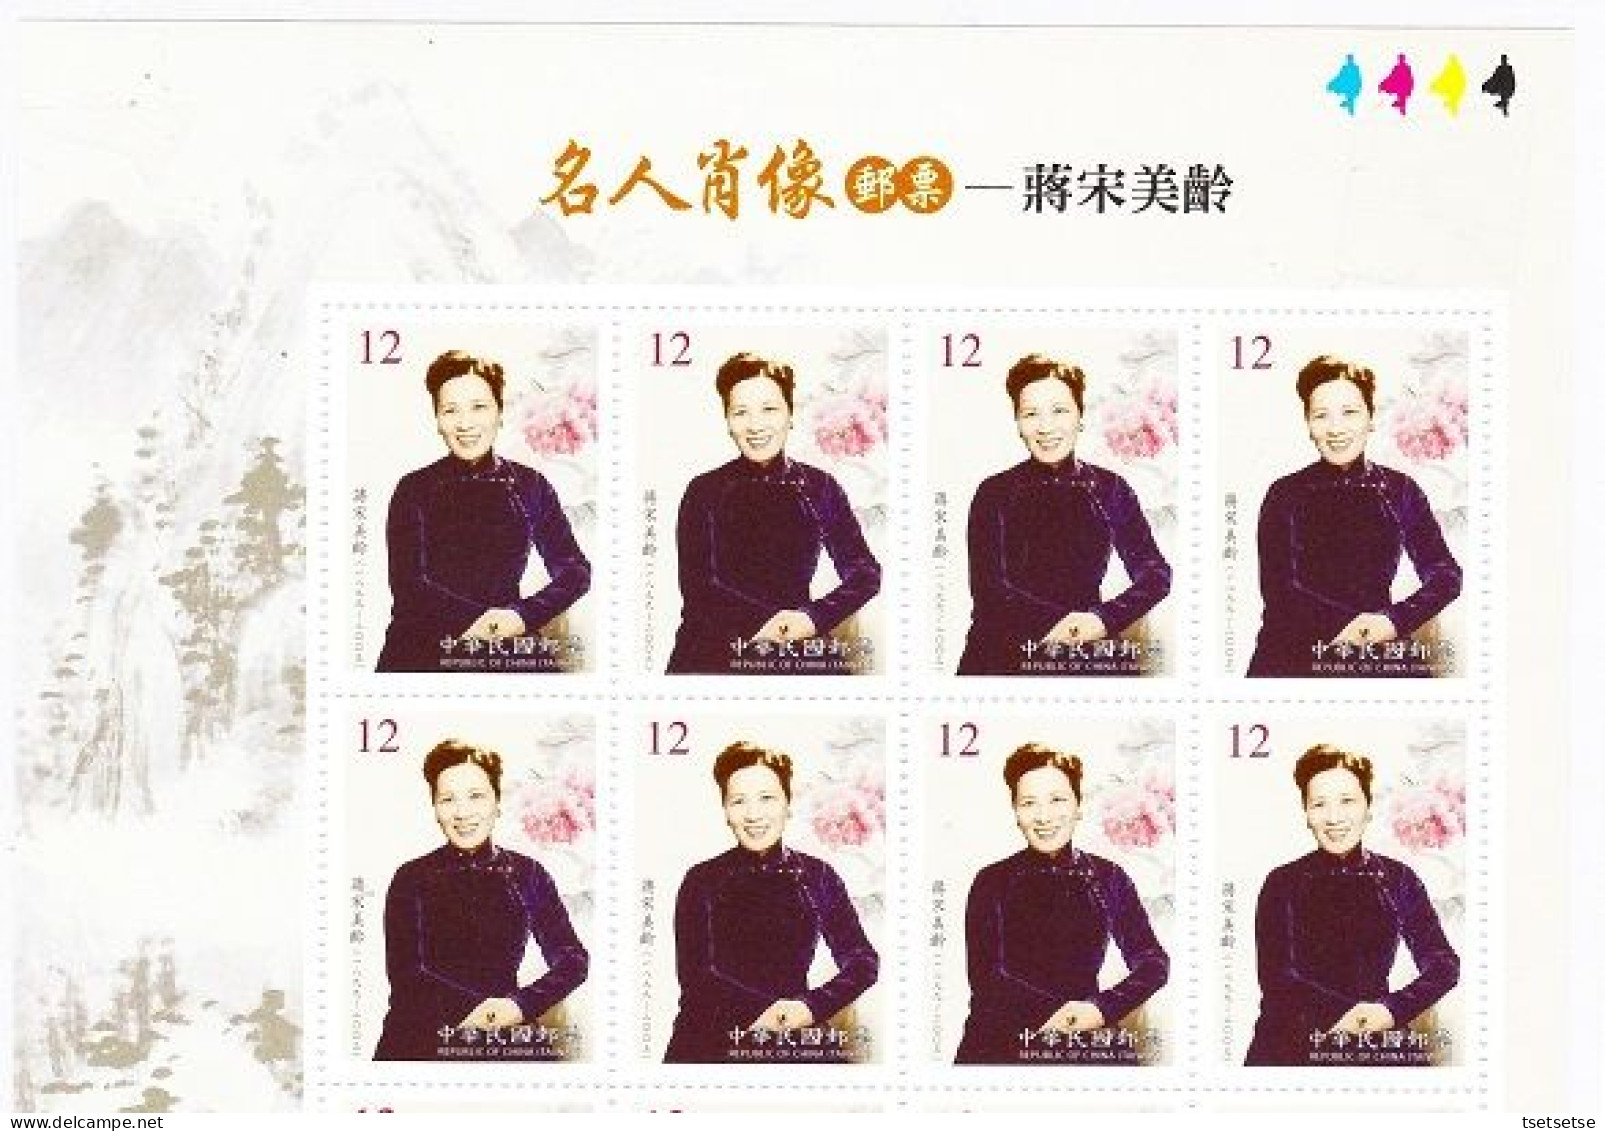 $200+ Value! Taiwan 2013 Chiang Soong Mayling Portrait Postage Stamps Full Sheet 蔣宋美齡 小版張 (20 Stamps) - Blocchi & Foglietti